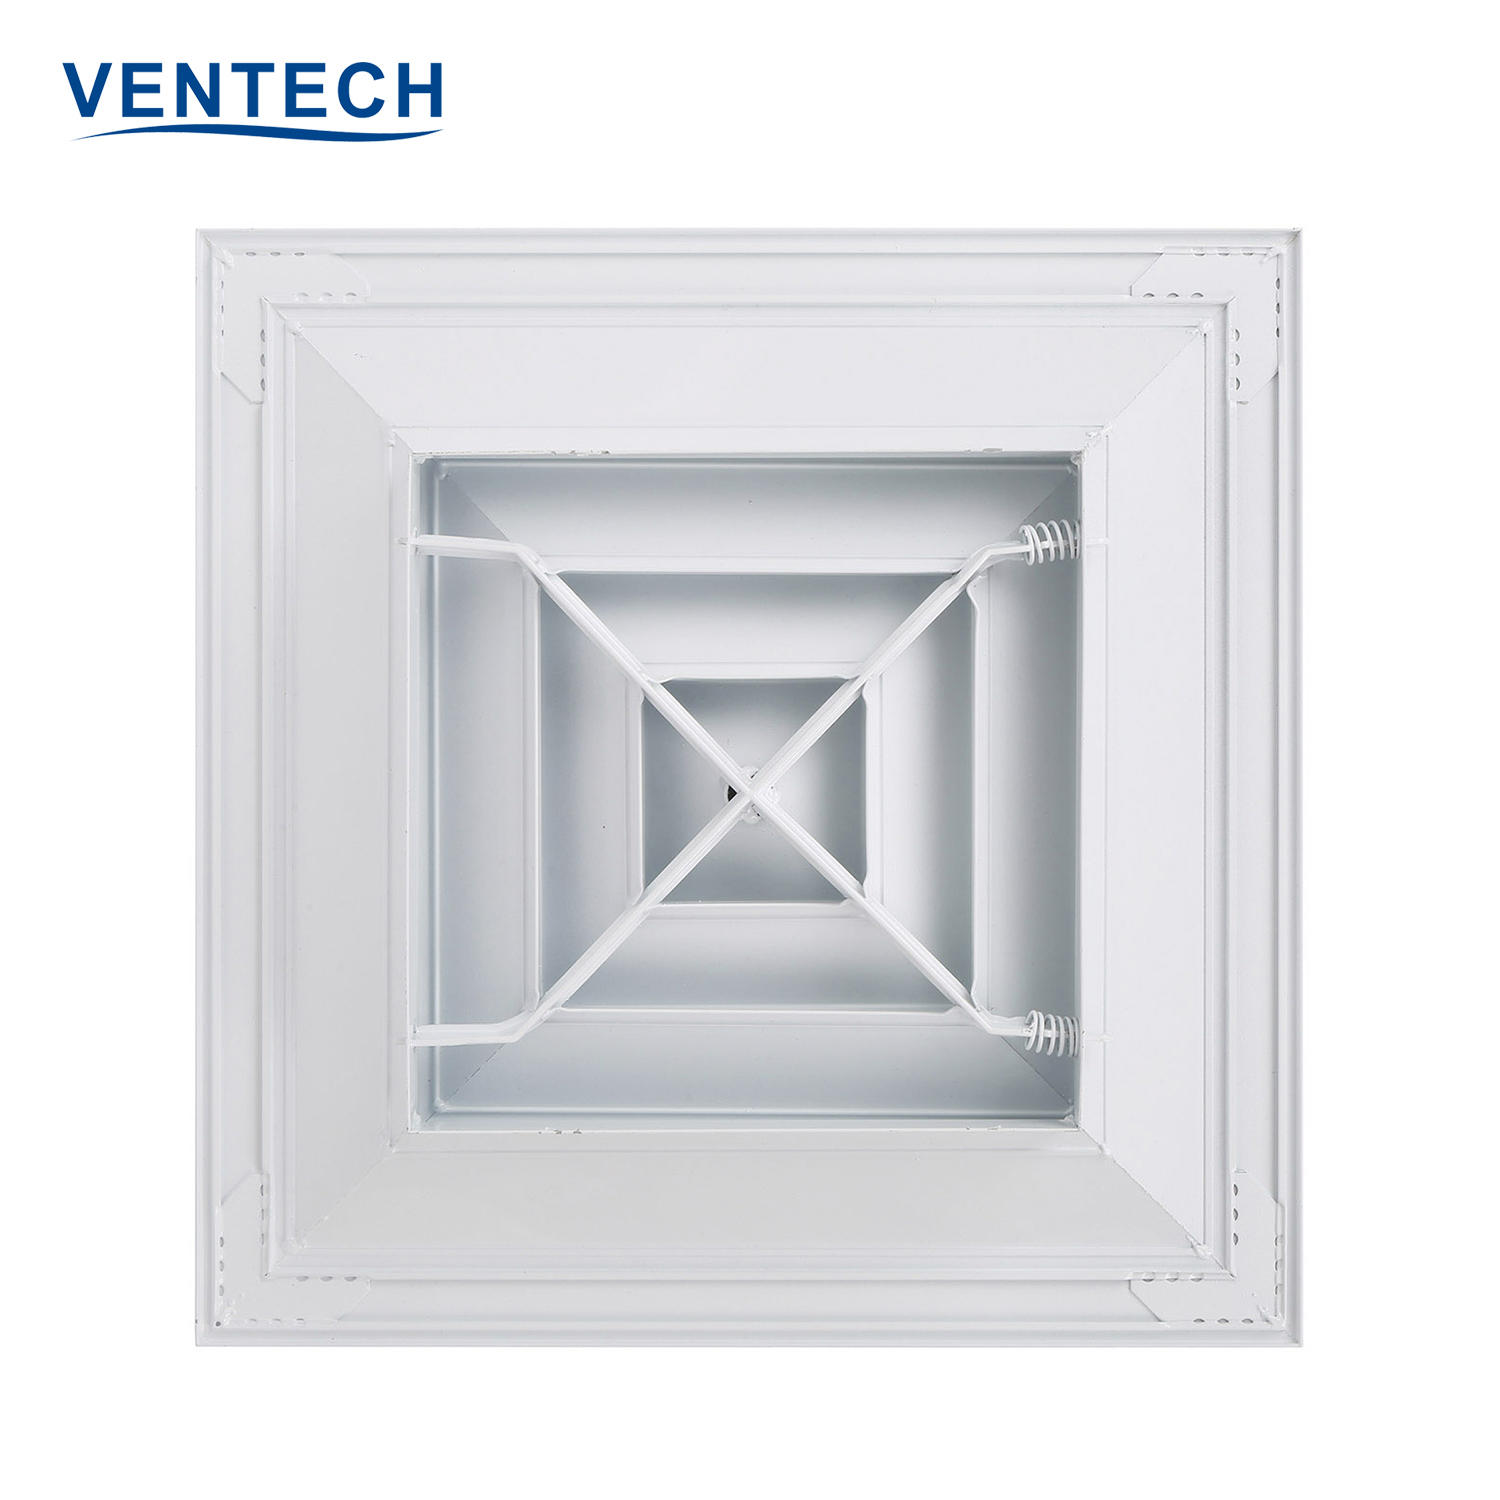 VENTECH Hvac System Aluminum Conditioning Exhaust Square Ceiling Air Duct Outlet Diffusers